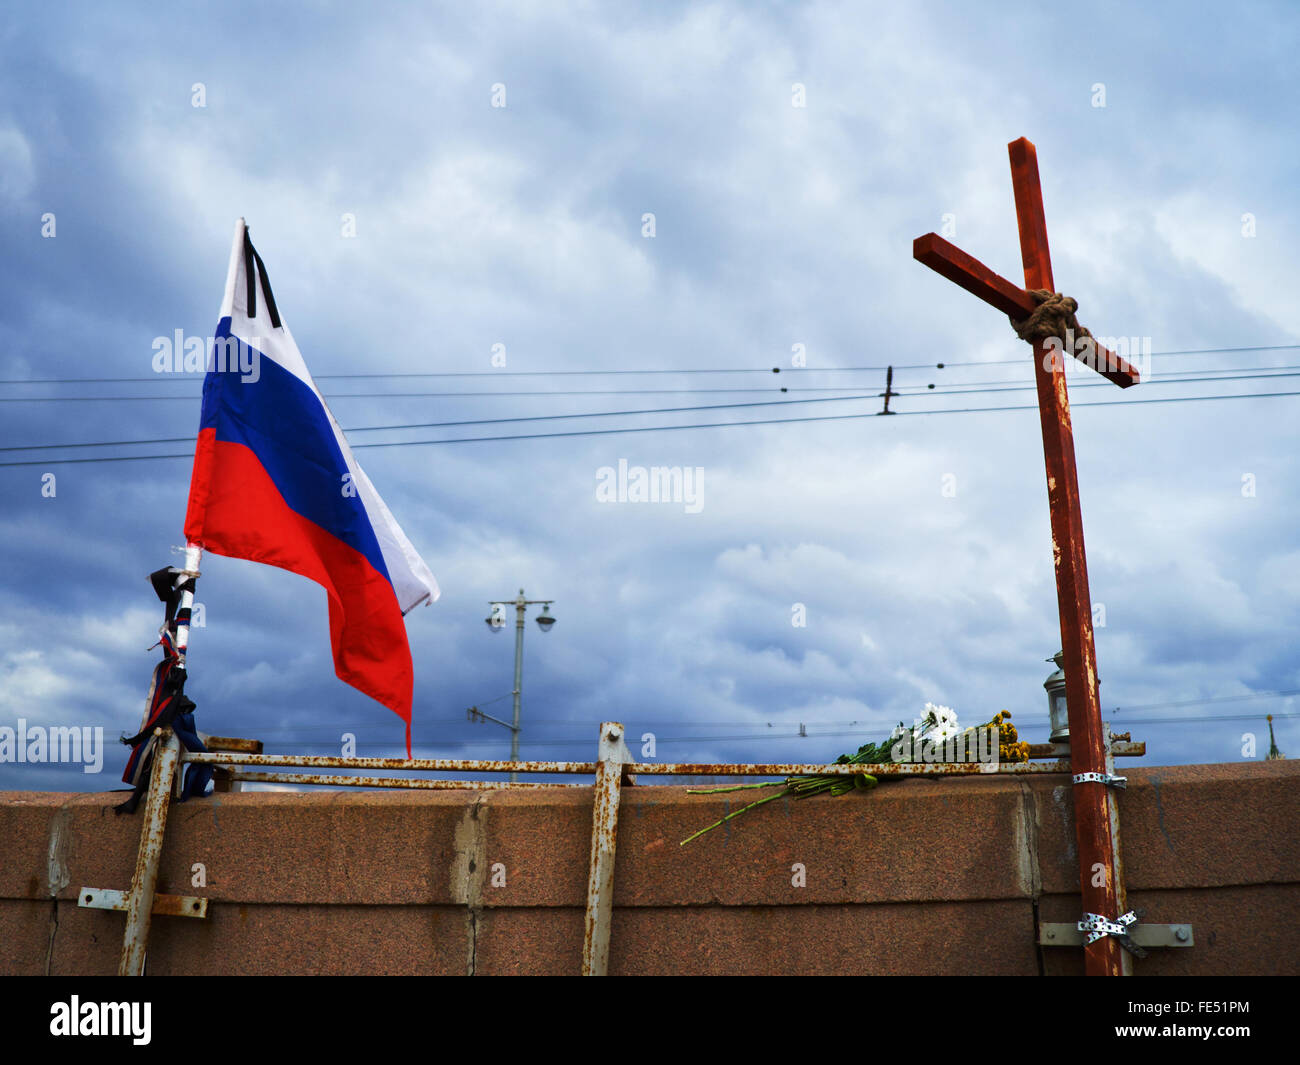 Moscow, Russian Federation - APRIL 2, 2015, Cross and Russia flag at bridge where Boris Nemtsov was killed on February 27, 2015 Stock Photo